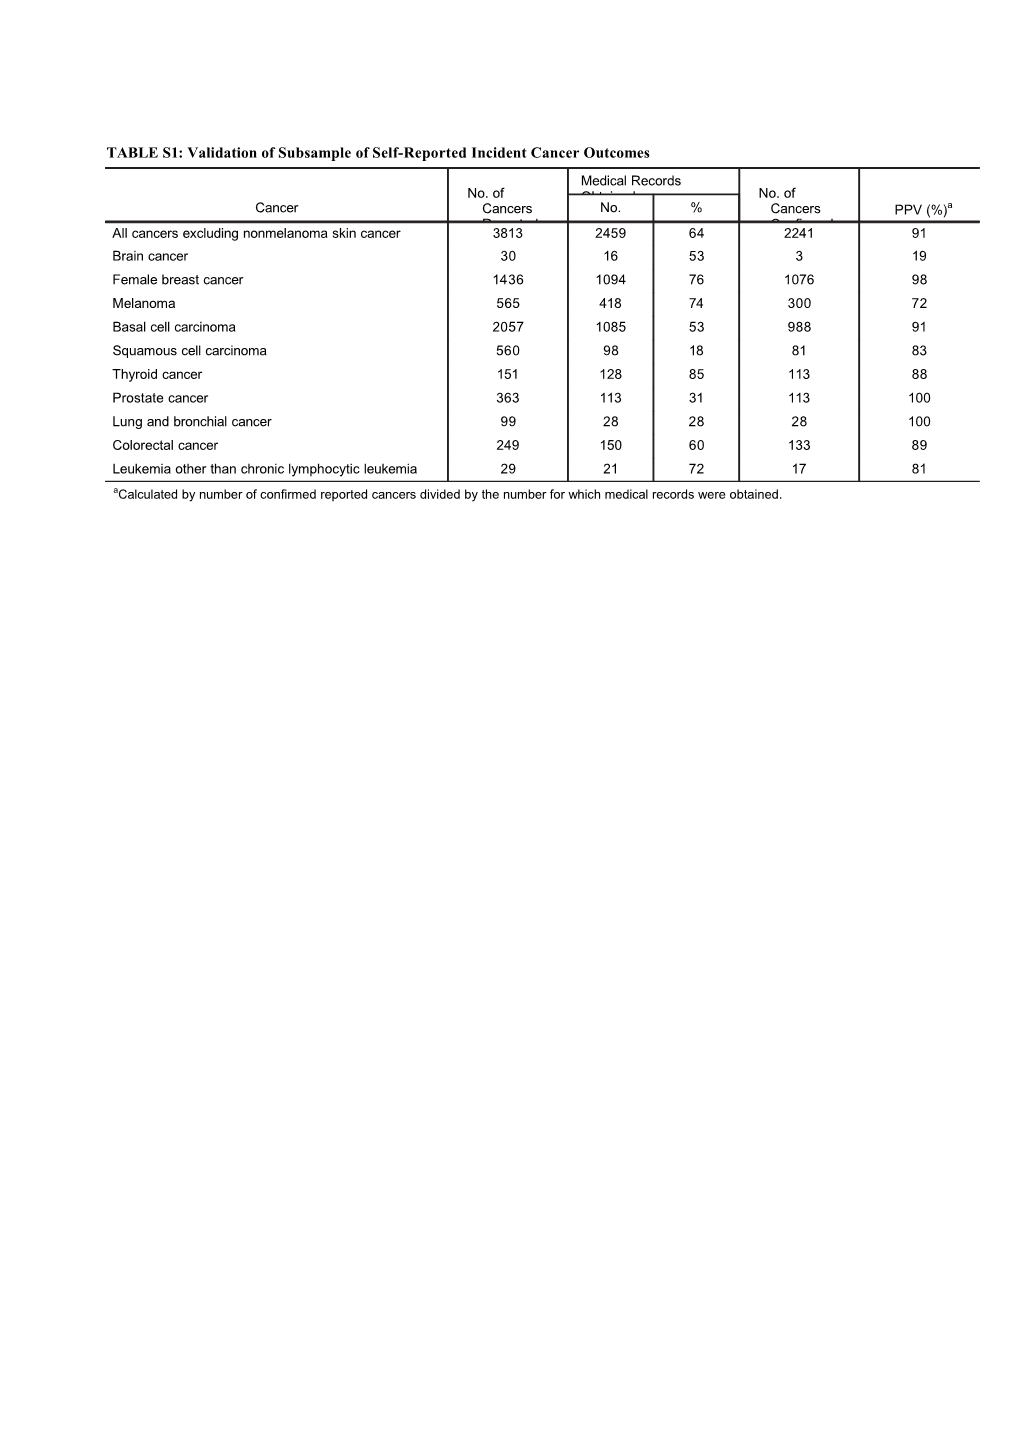 TABLE S1: Validation of Subsample of Self-Reported Incident Cancer Outcomes